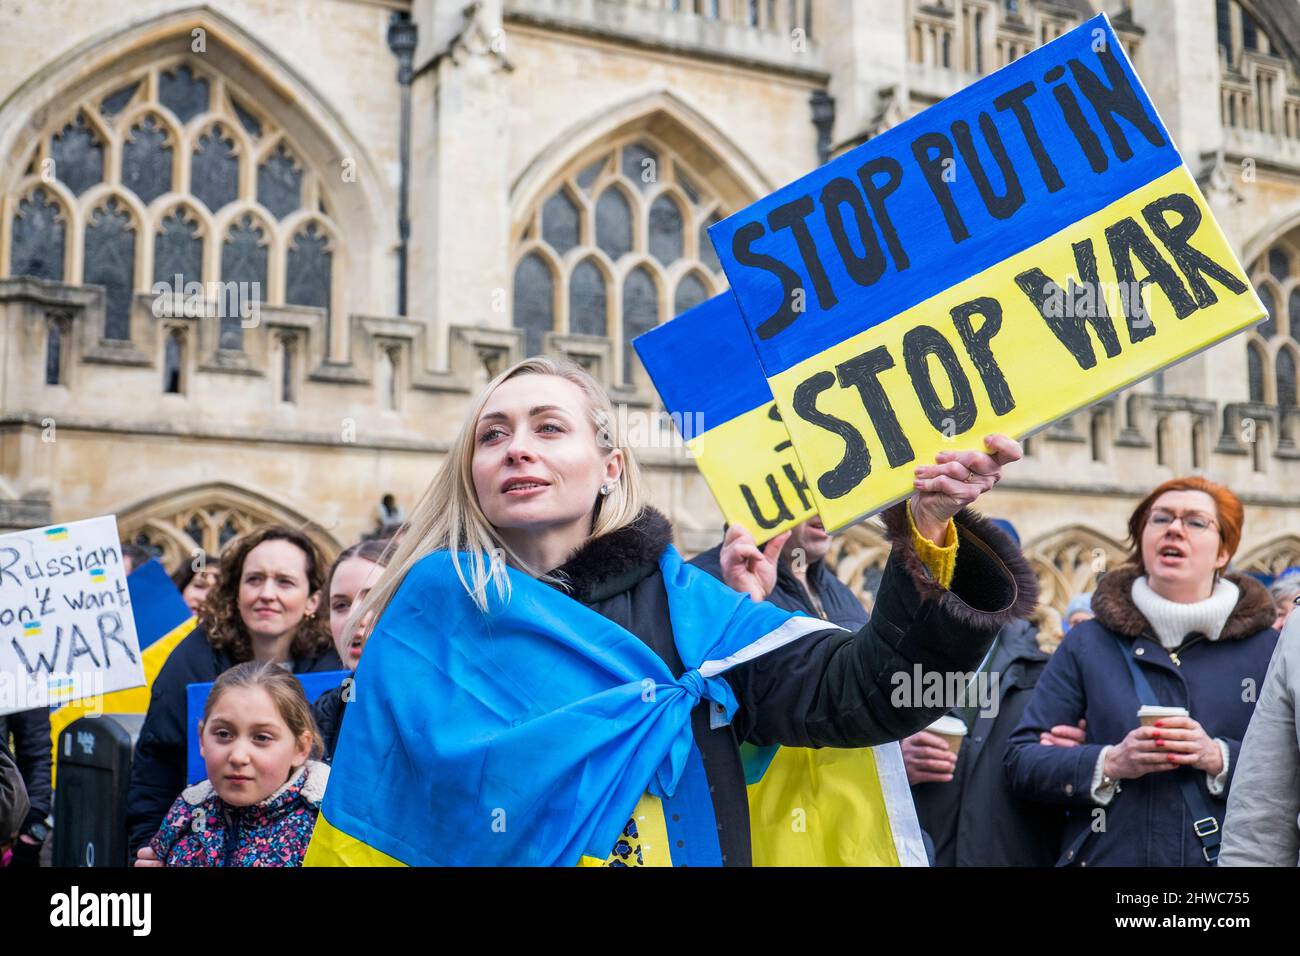 Bath, UK. 5th March, 2022. A woman draped in the Ukrainian flag holds an anti-Putin / stop the war placard as she listens to speeches in front of Bath Abbey during a demonstration against Russia's invasion of Ukraine. The demonstration was organised in order to allow local people to show their solidarity with Ukraine in the Russia-Ukraine war and to condemn Putin's actions. Credit: Lynchpics/Alamy Live News Stock Photo